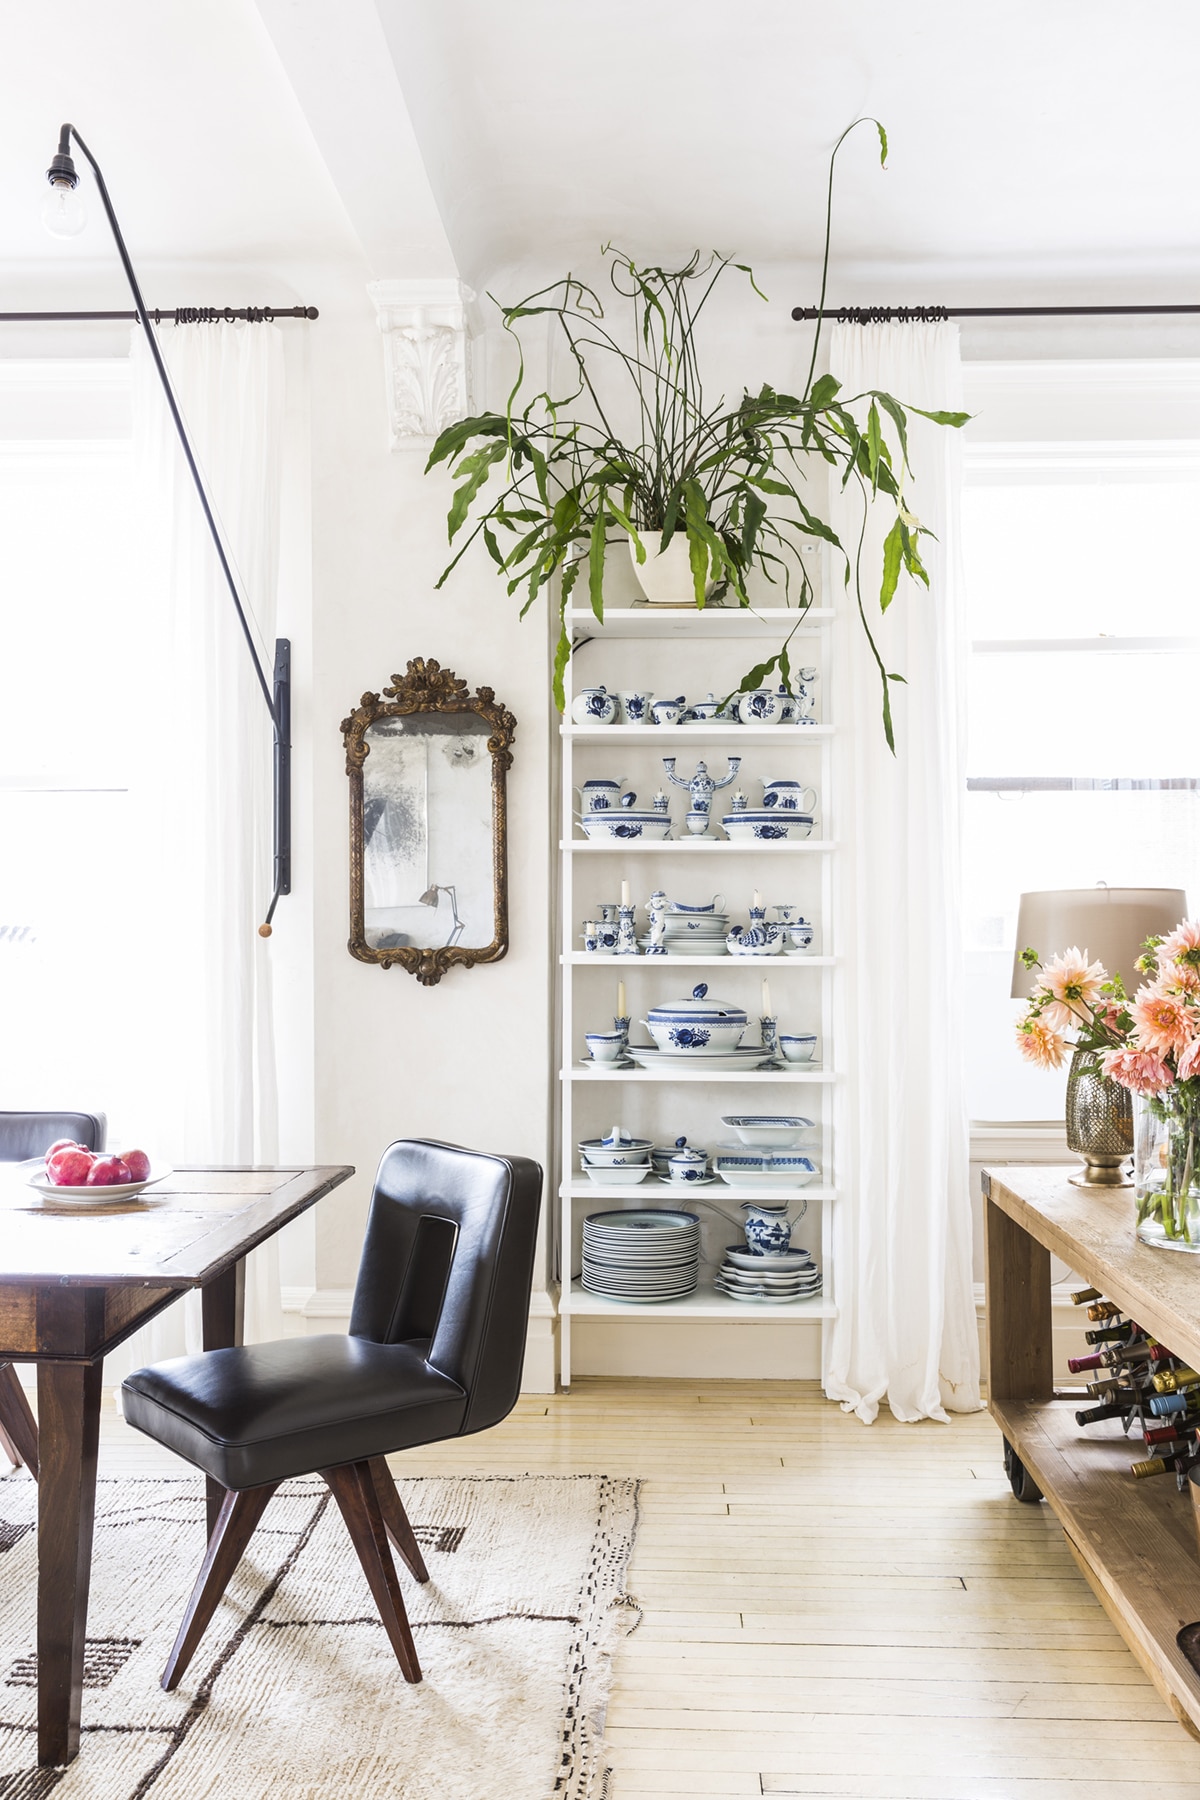 blue and white china collection display in eclectic loft | coco kelley